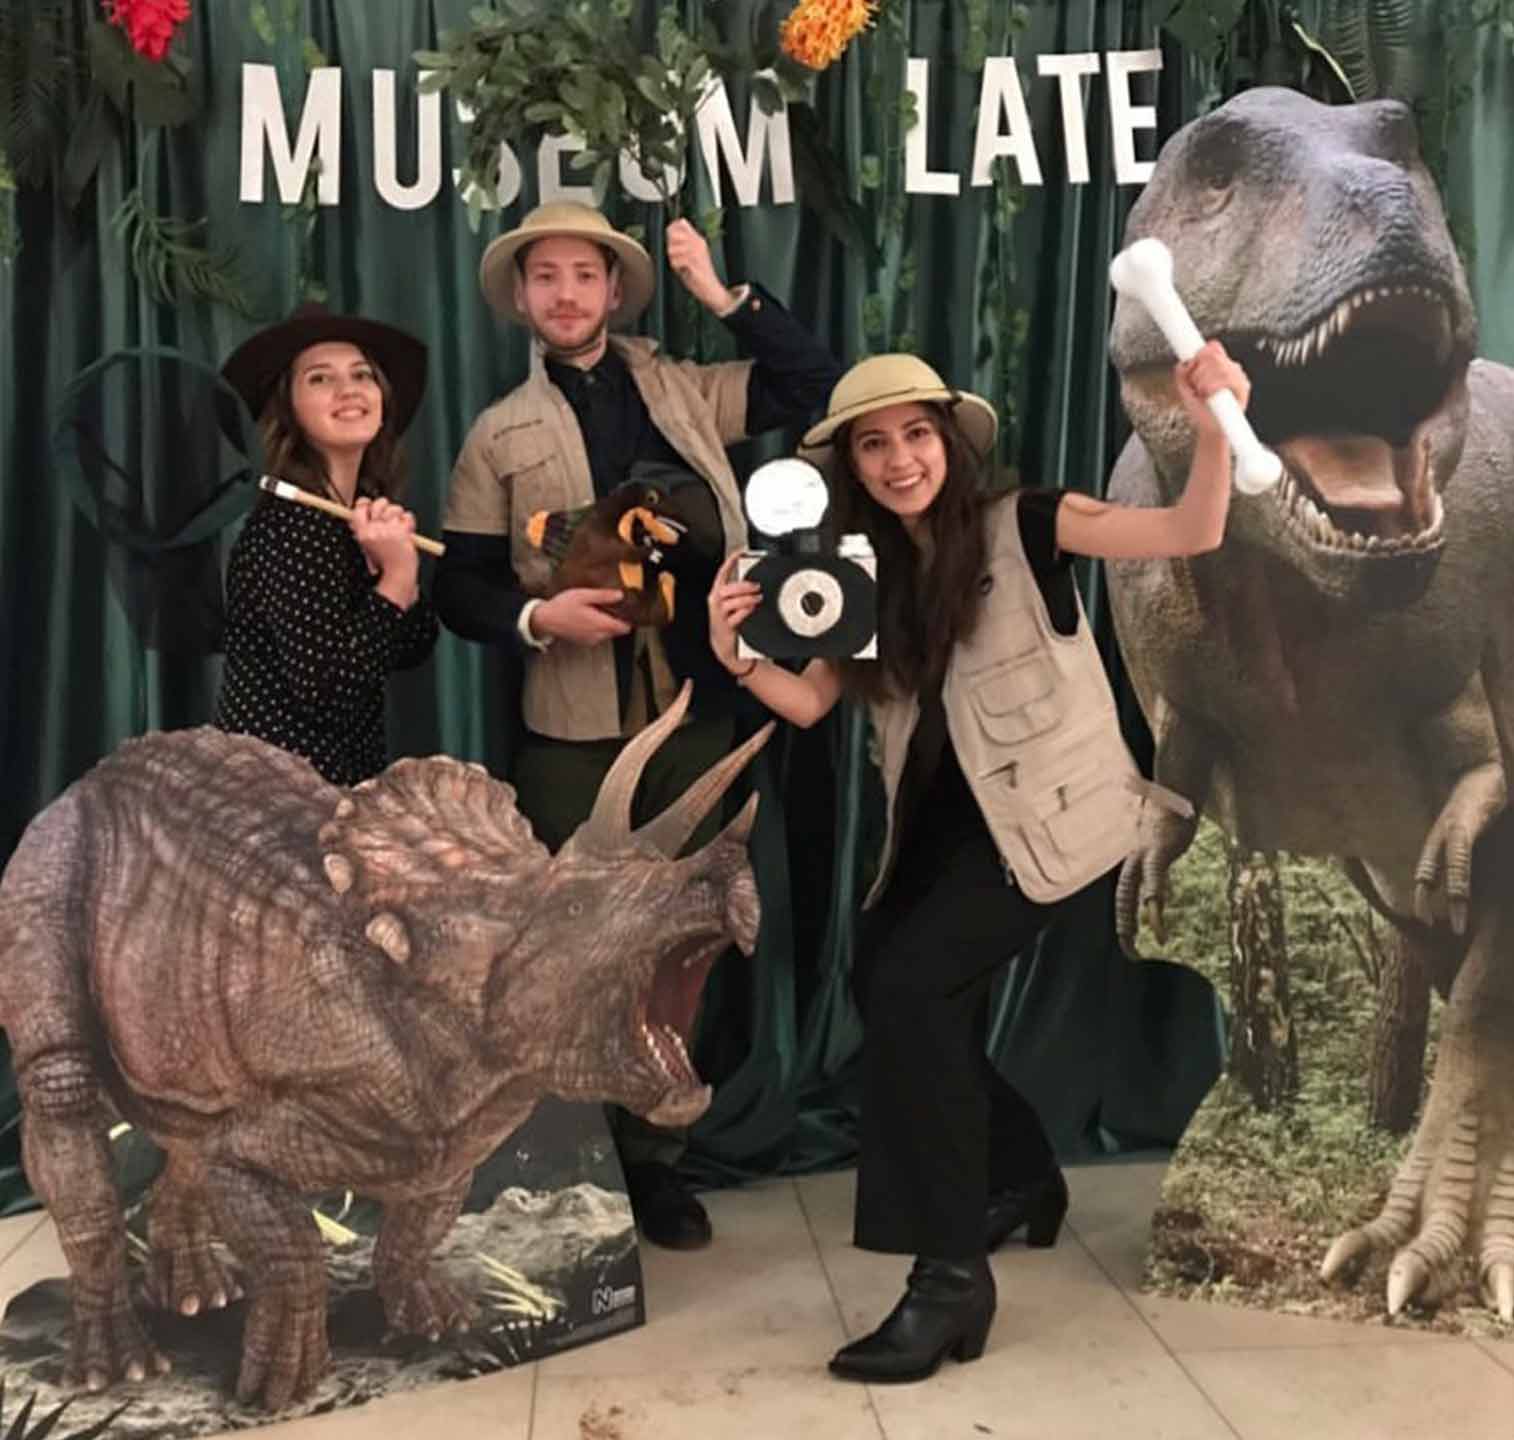 The Media Shop team - in front of a museum backdrop, striking a pose beside cardboard dinosaurs